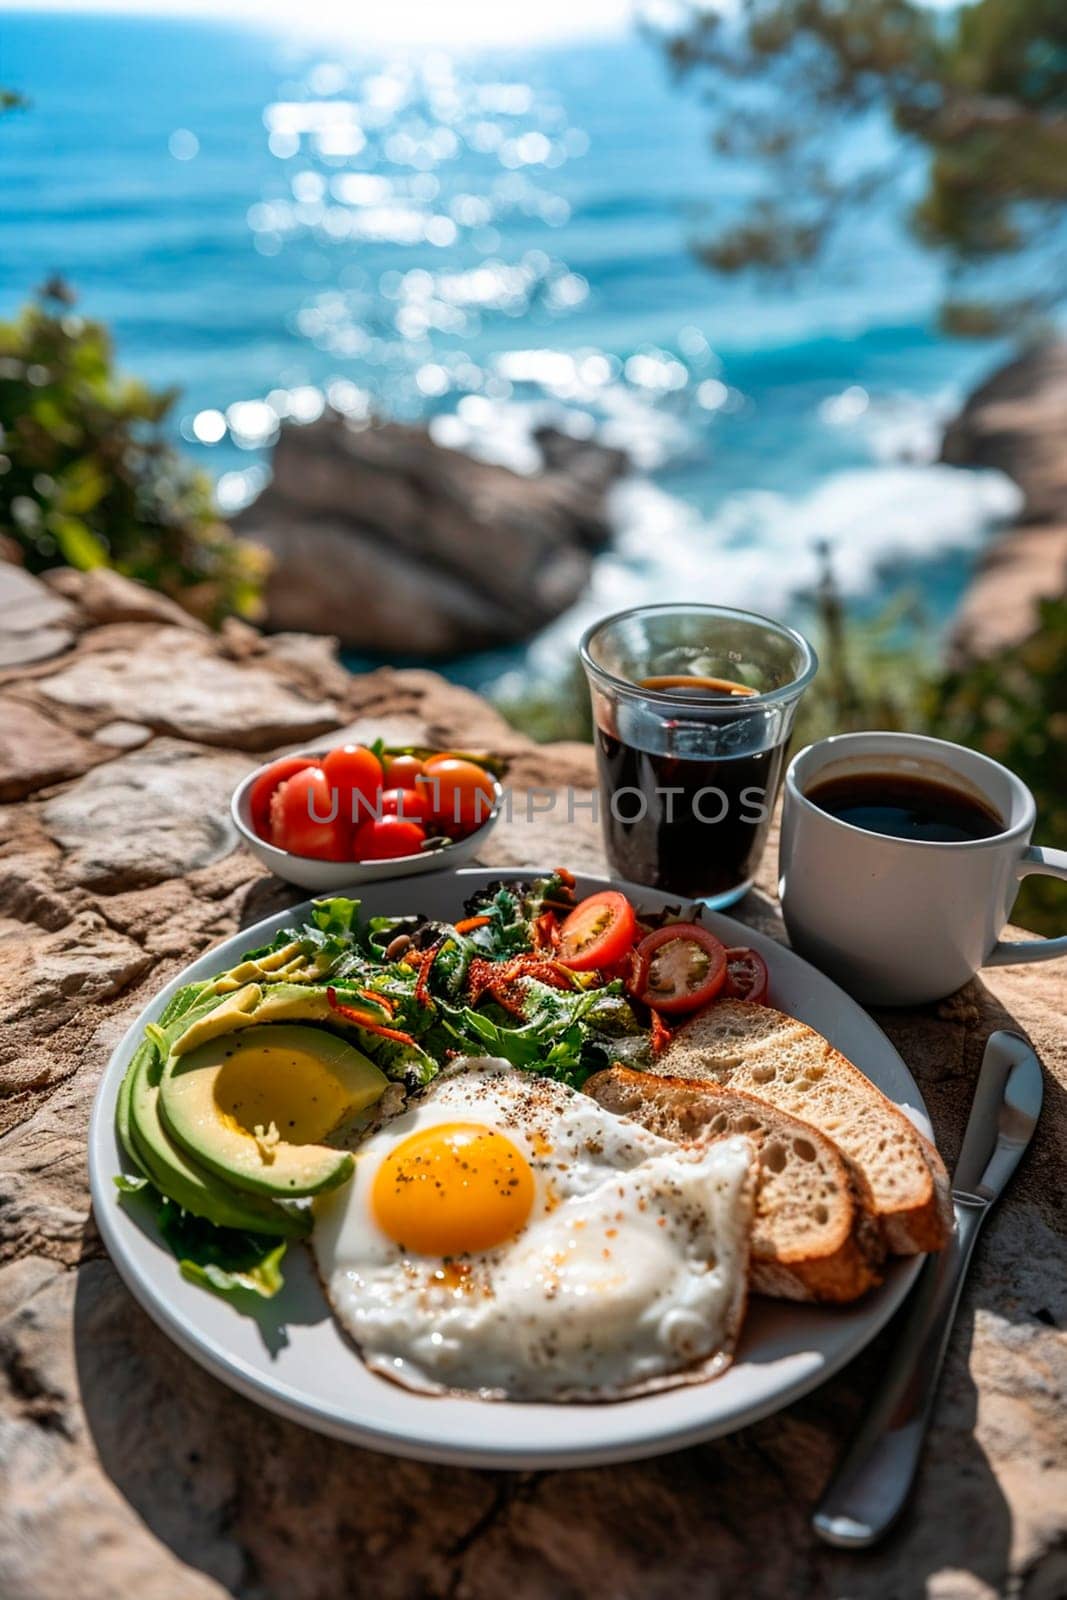 Breakfast avocado eggs and coffee by the sea. Selective focus. Food.